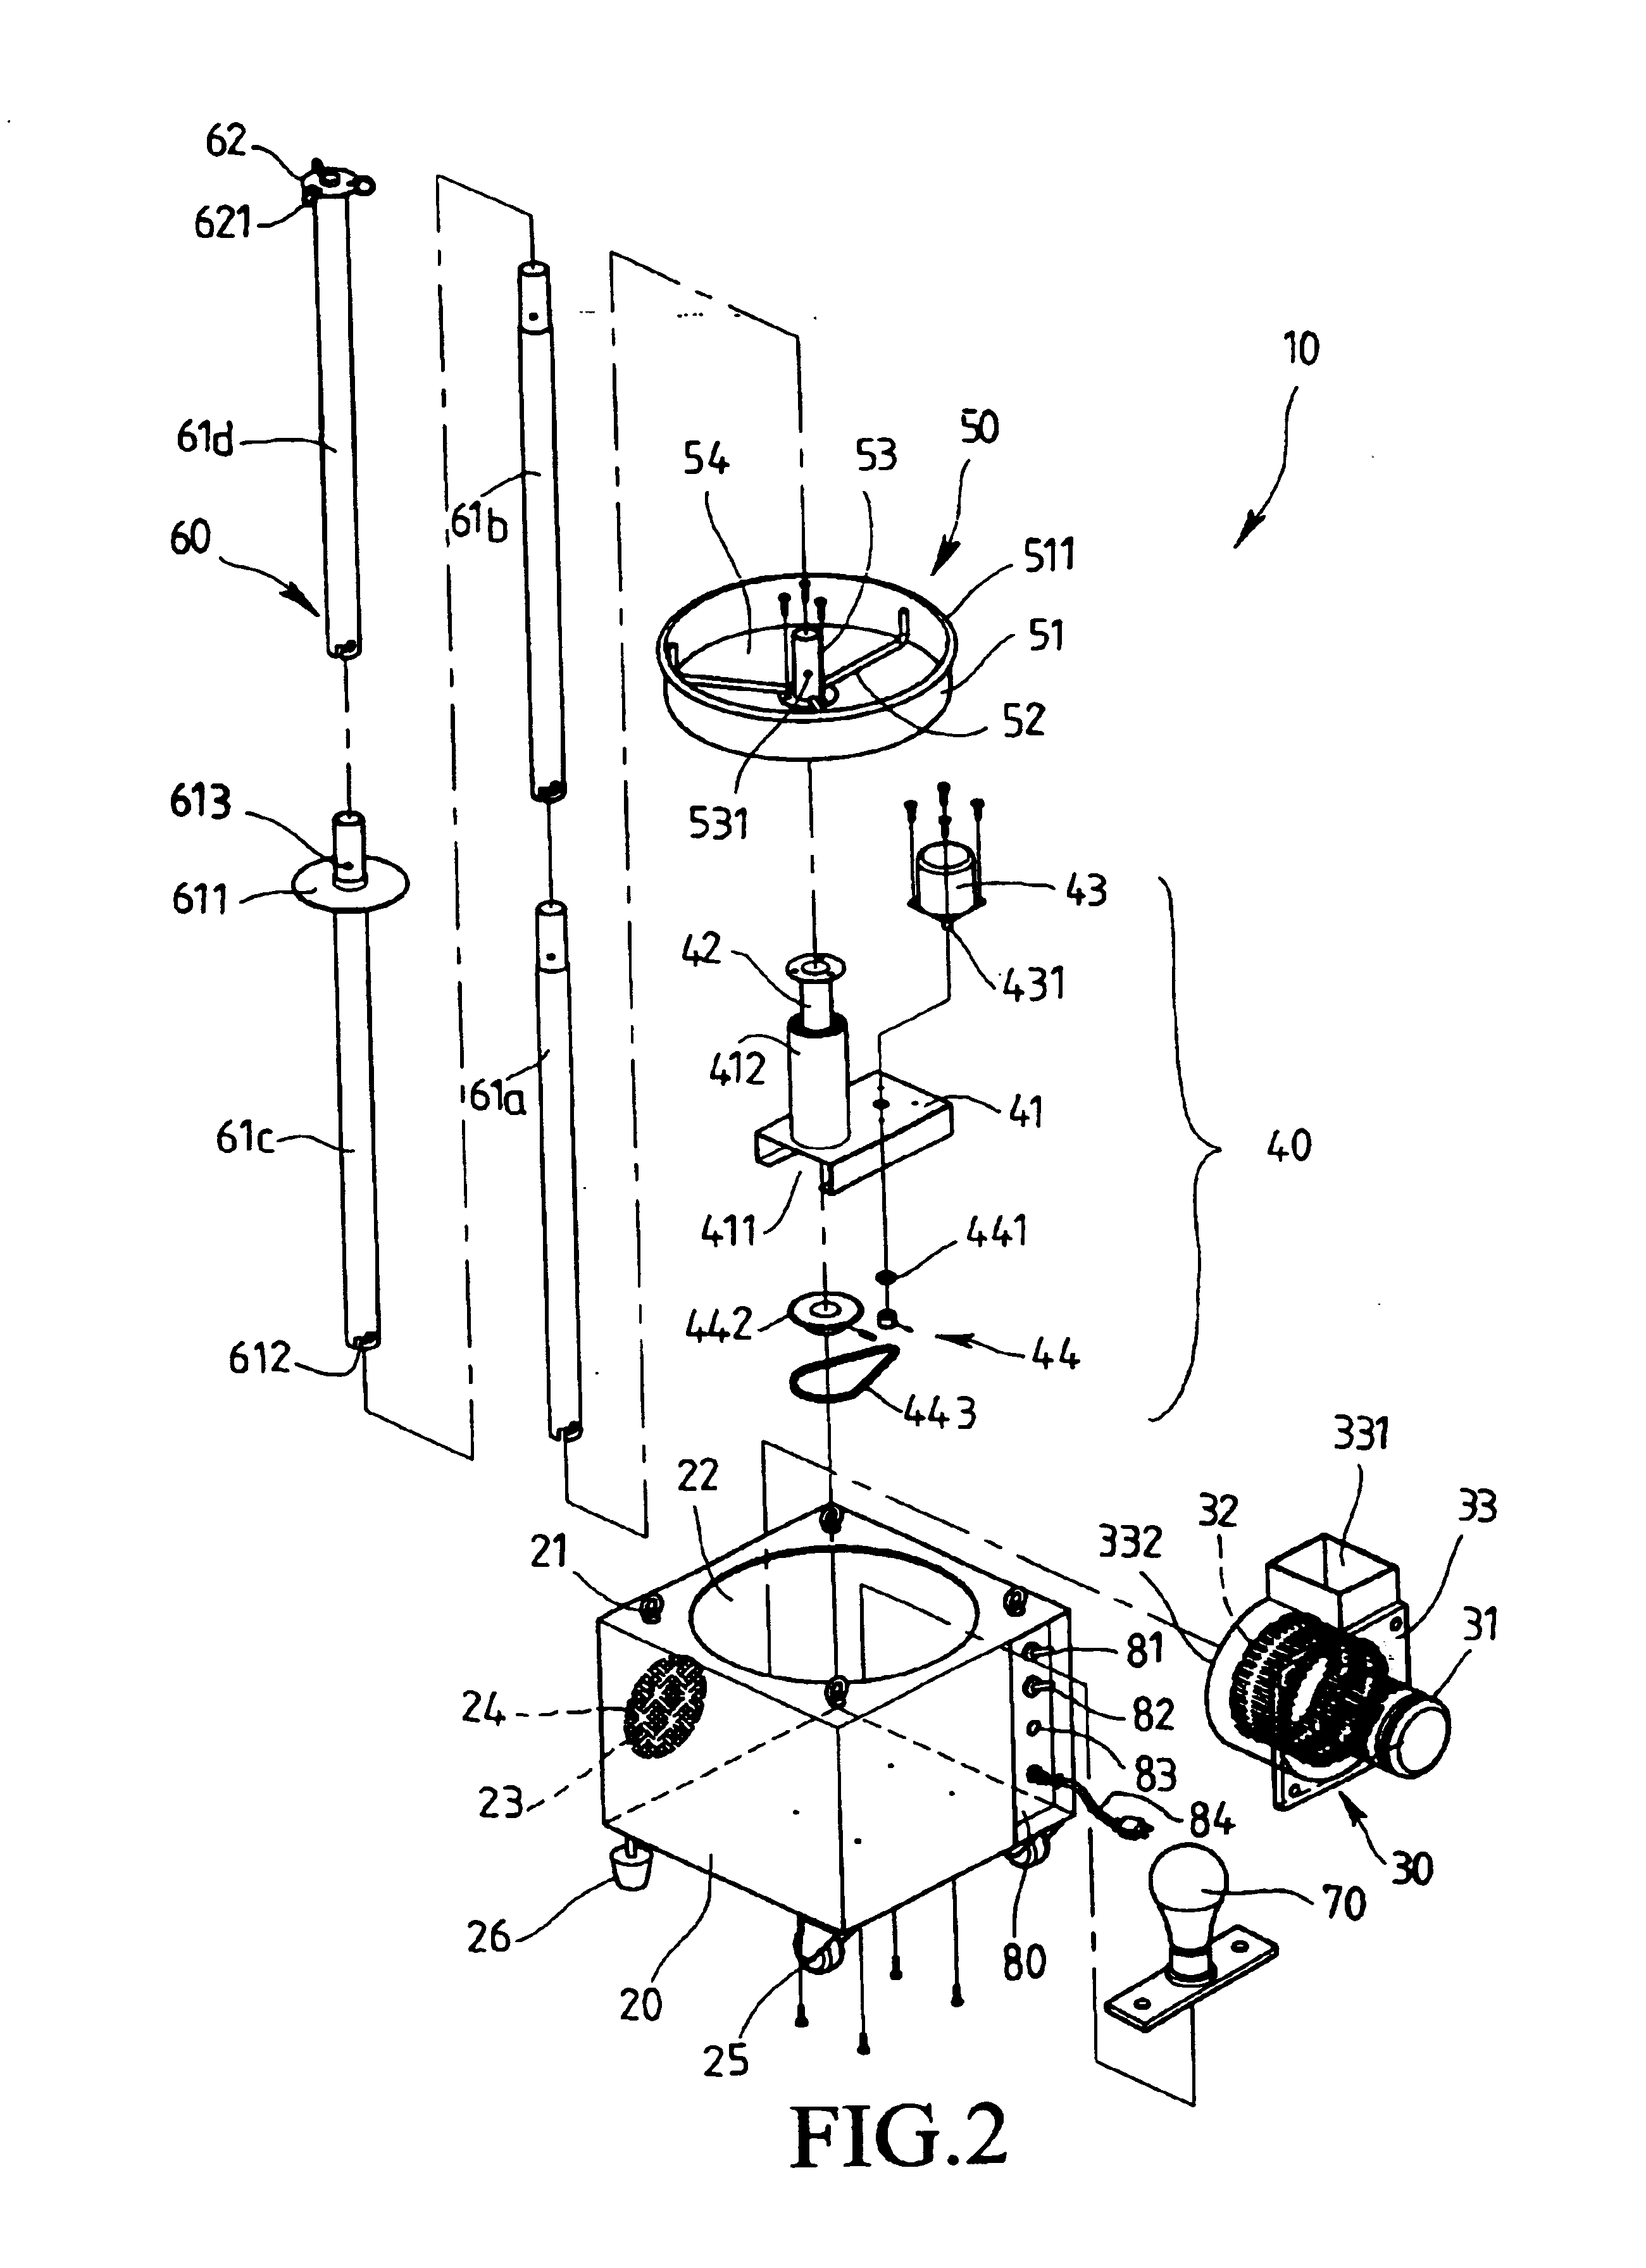 Rotating inflatable device with built-in blower and sensor light